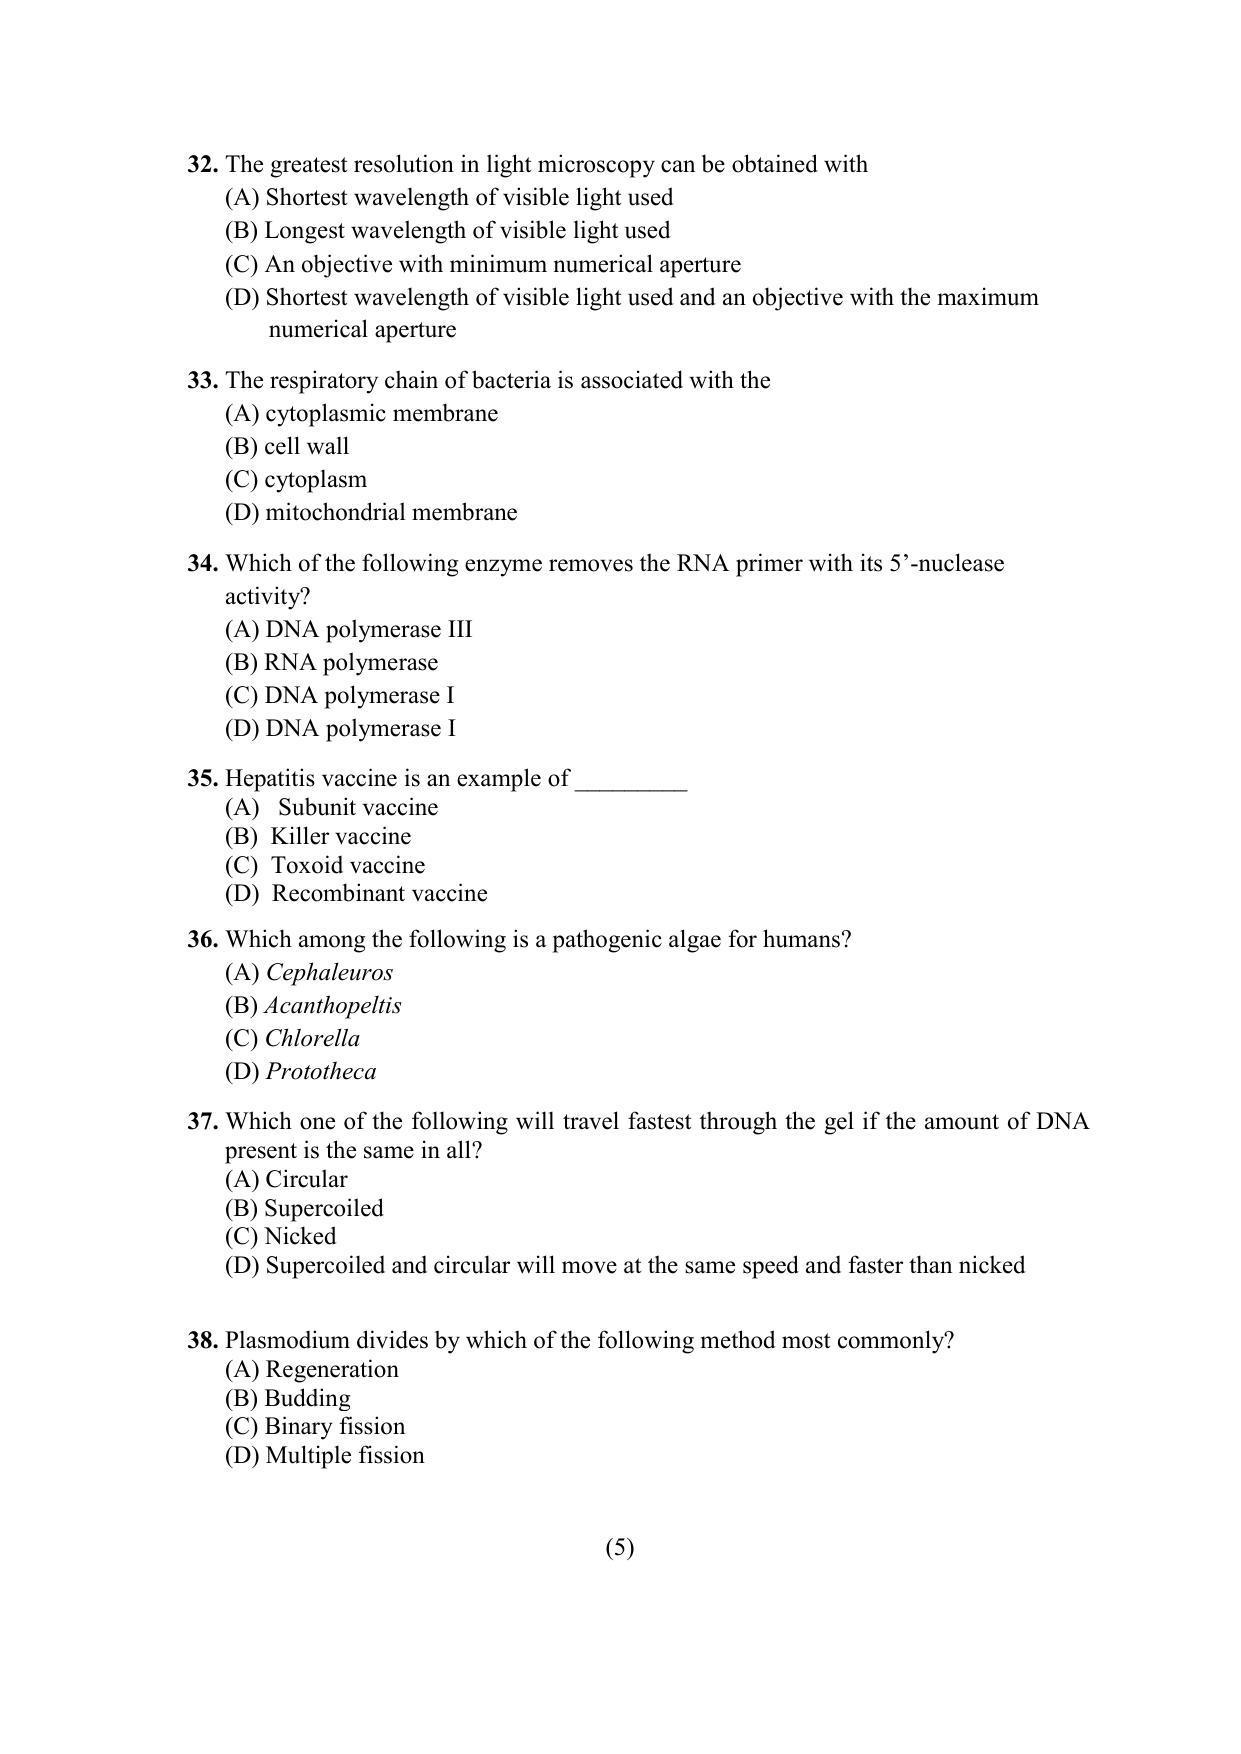 PU MPET Anthropology 2022 Question Papers - Page 46